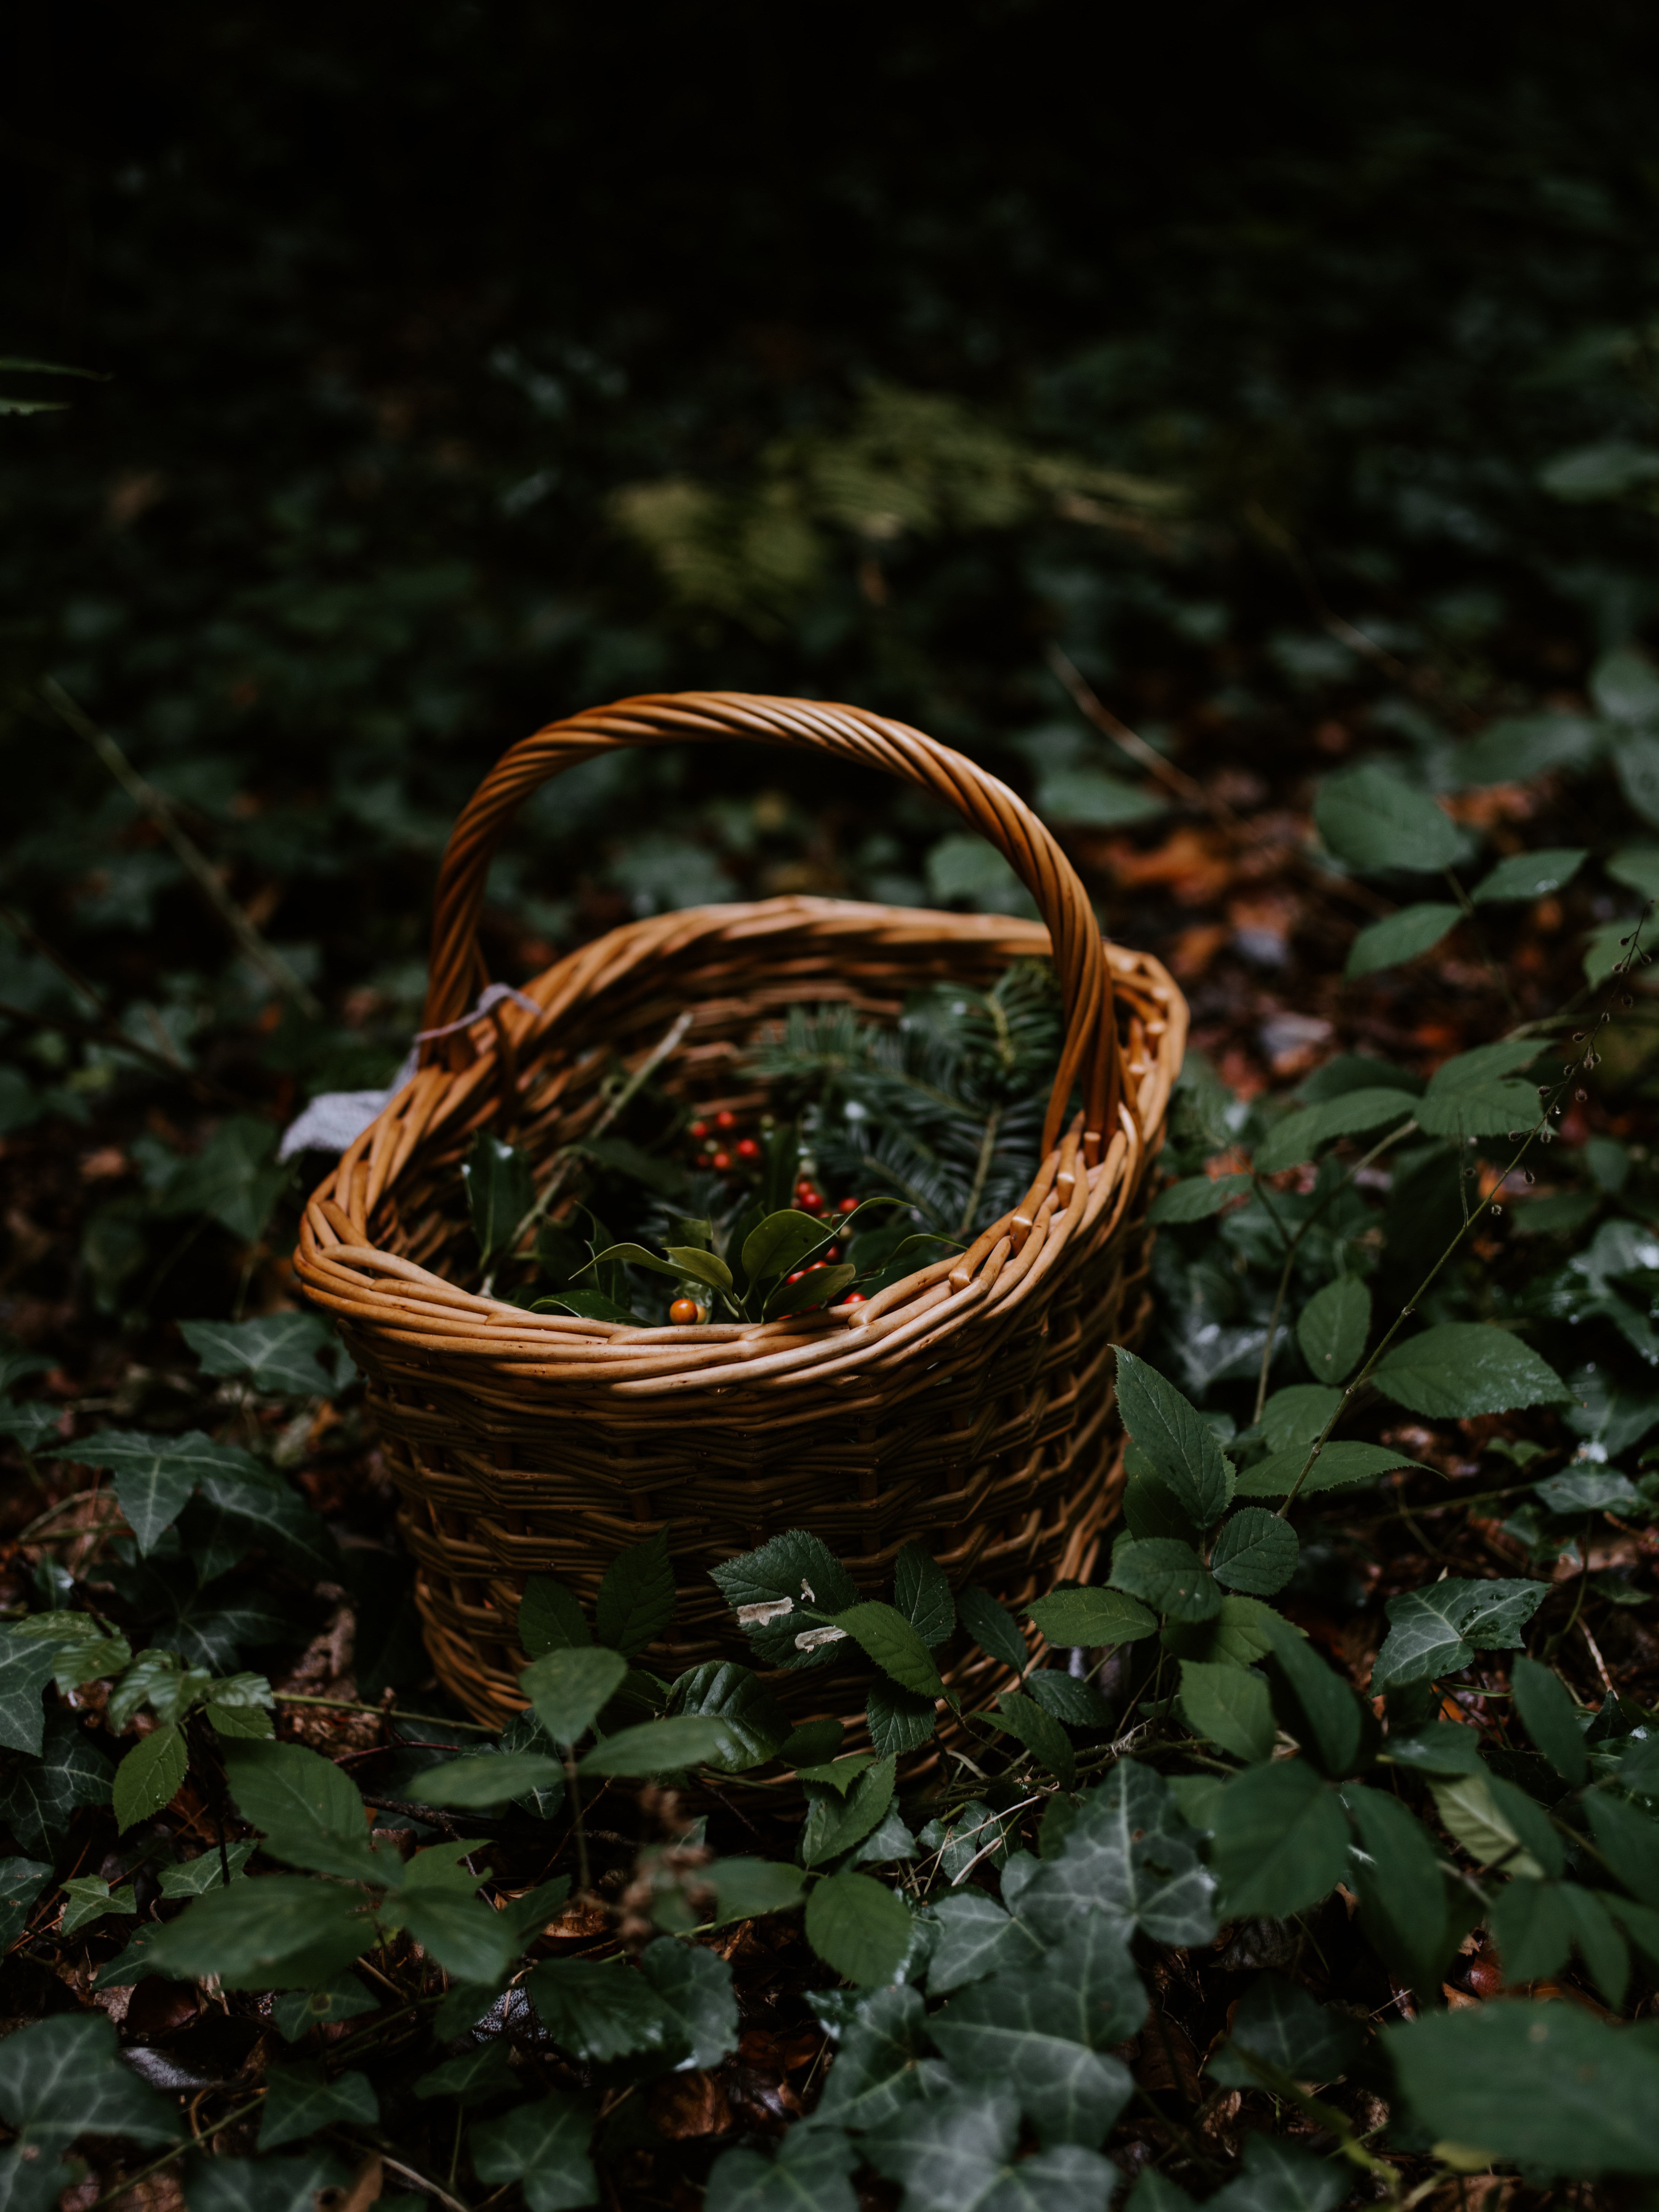 miscellaneous, nature, berries, miscellanea, branches, basket, wicker, braided HD wallpaper